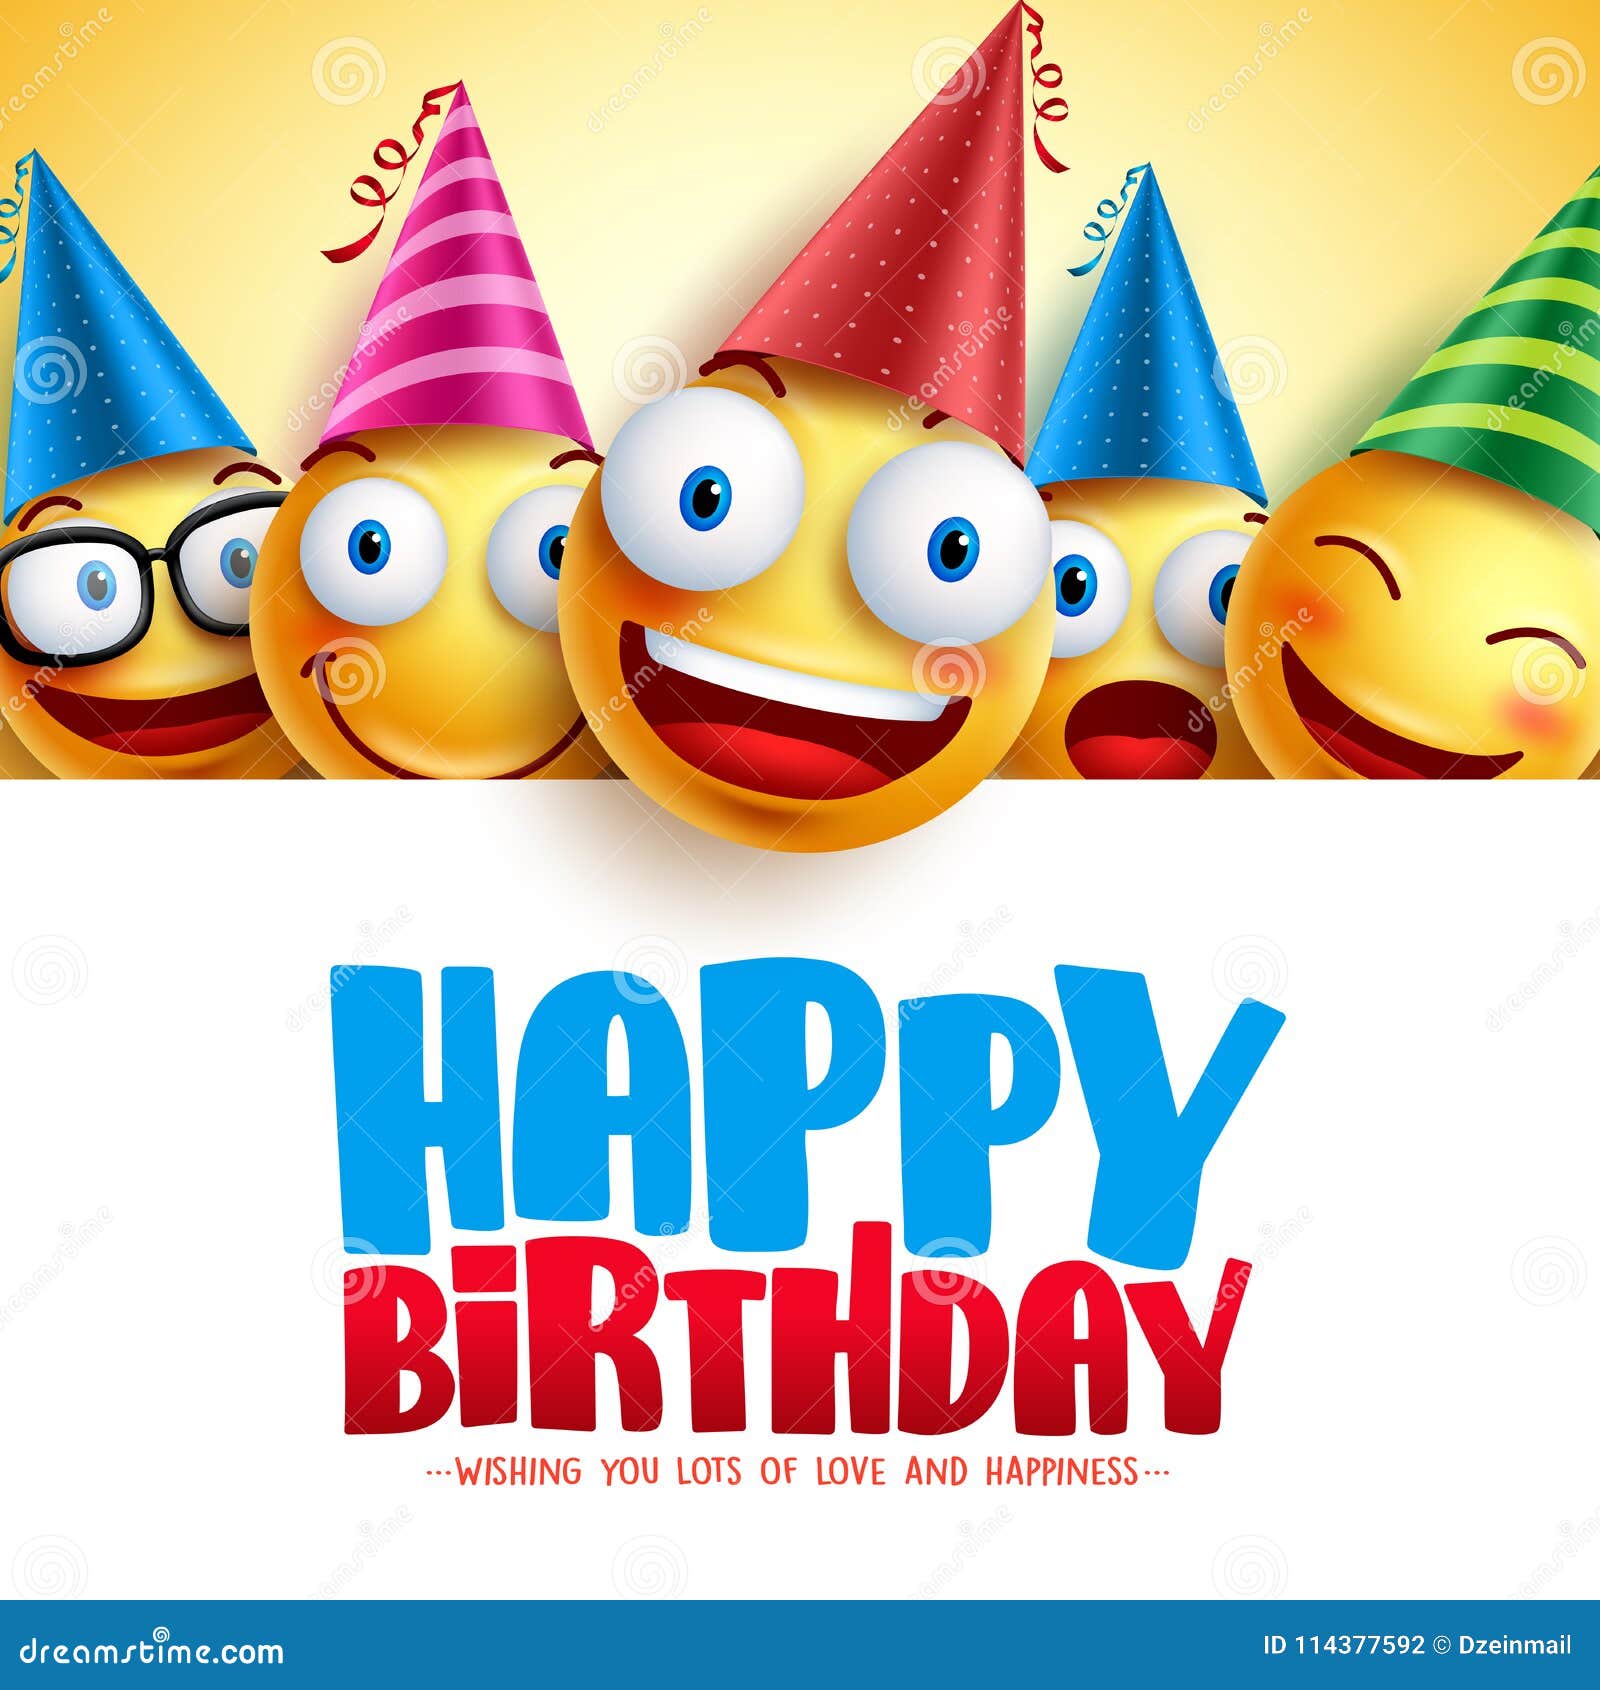 Happy Birthday Smileys Vector Background Design with Yellow Funny and ...